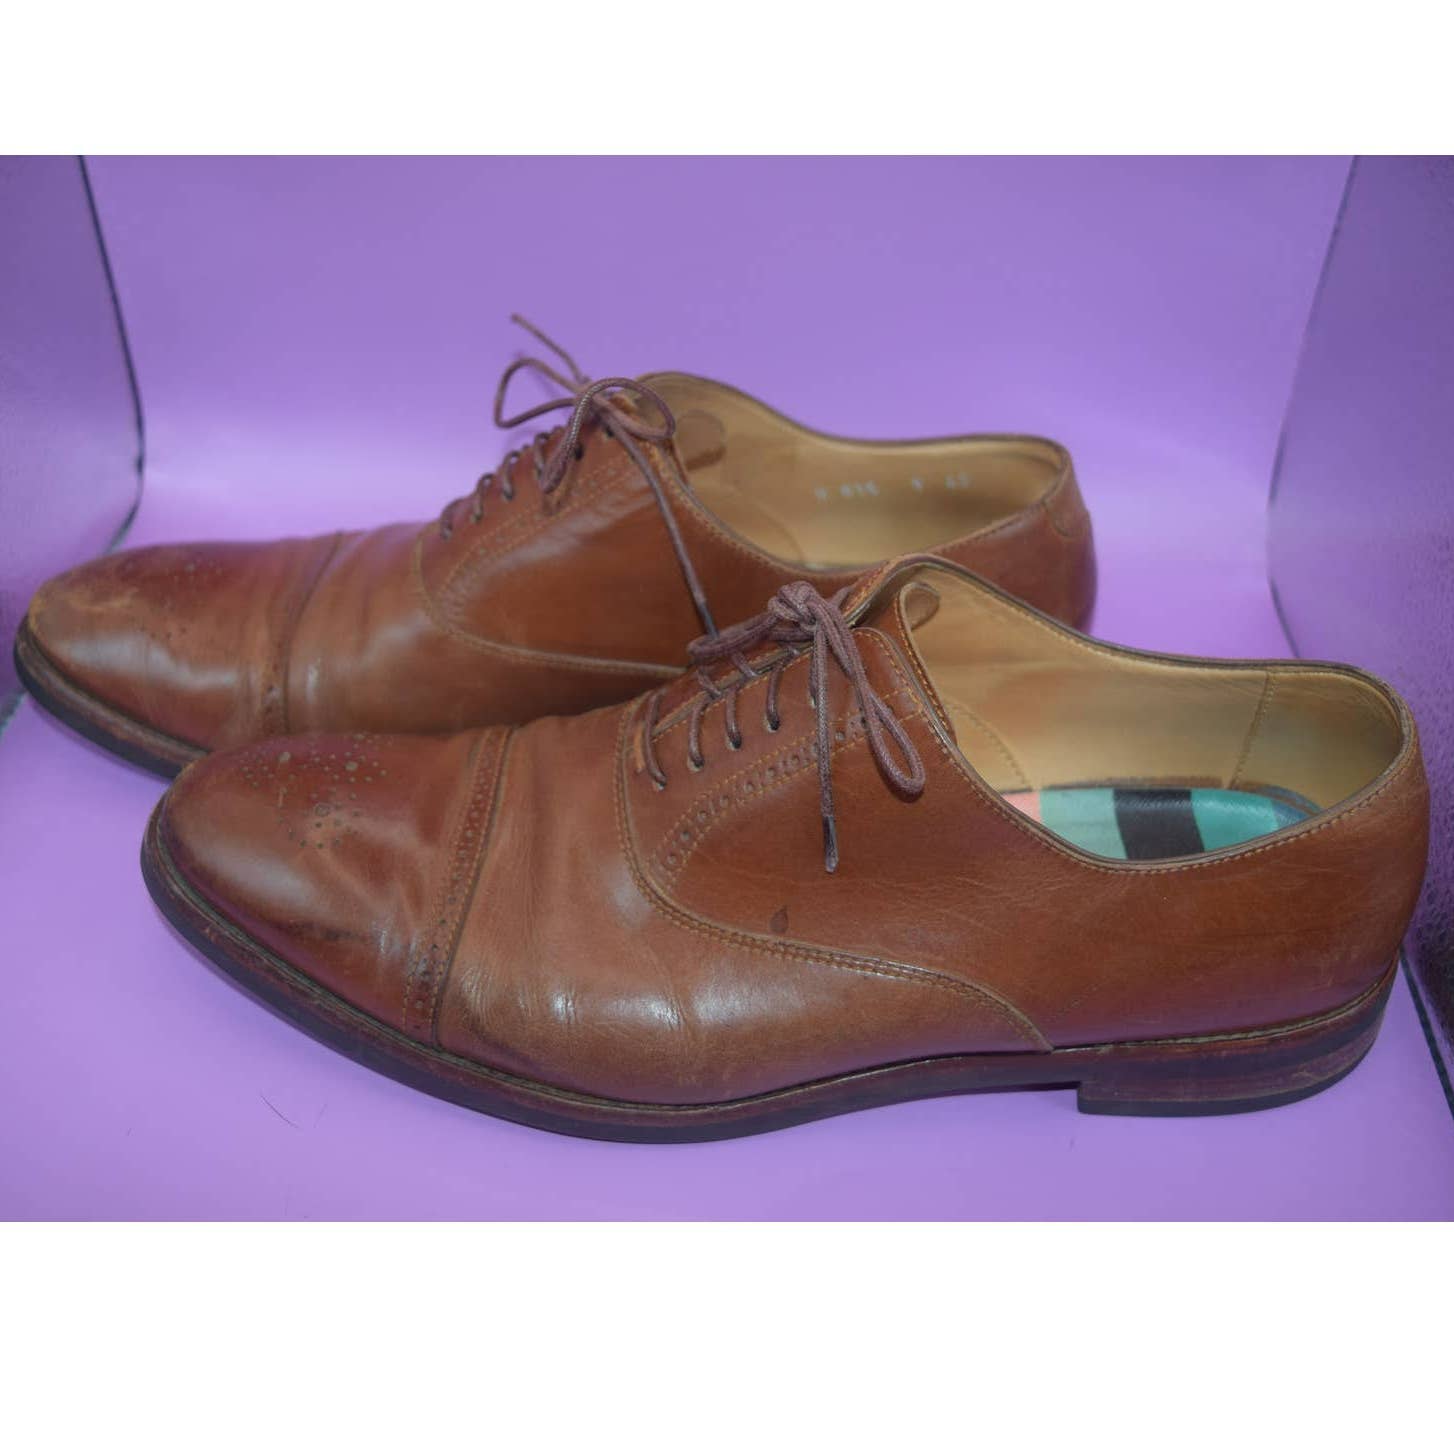 Paul Smith Brown Cap Toe Oxford Shoes - 9